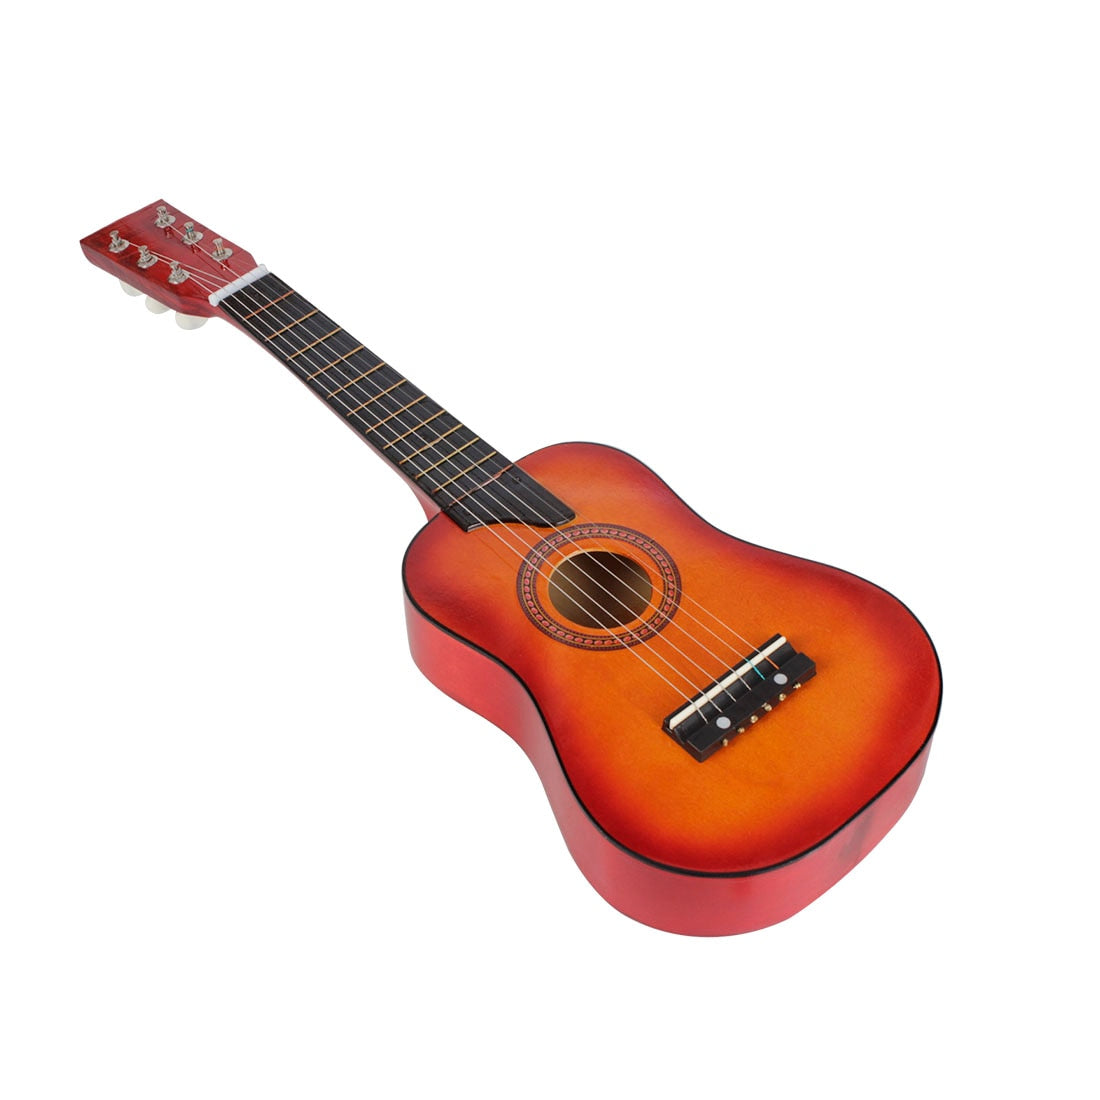 25 Inch Basswood Acoustic Guitar with  Pick Strings for Children and Beginner Send gifts Musical Stringed Instrument hot